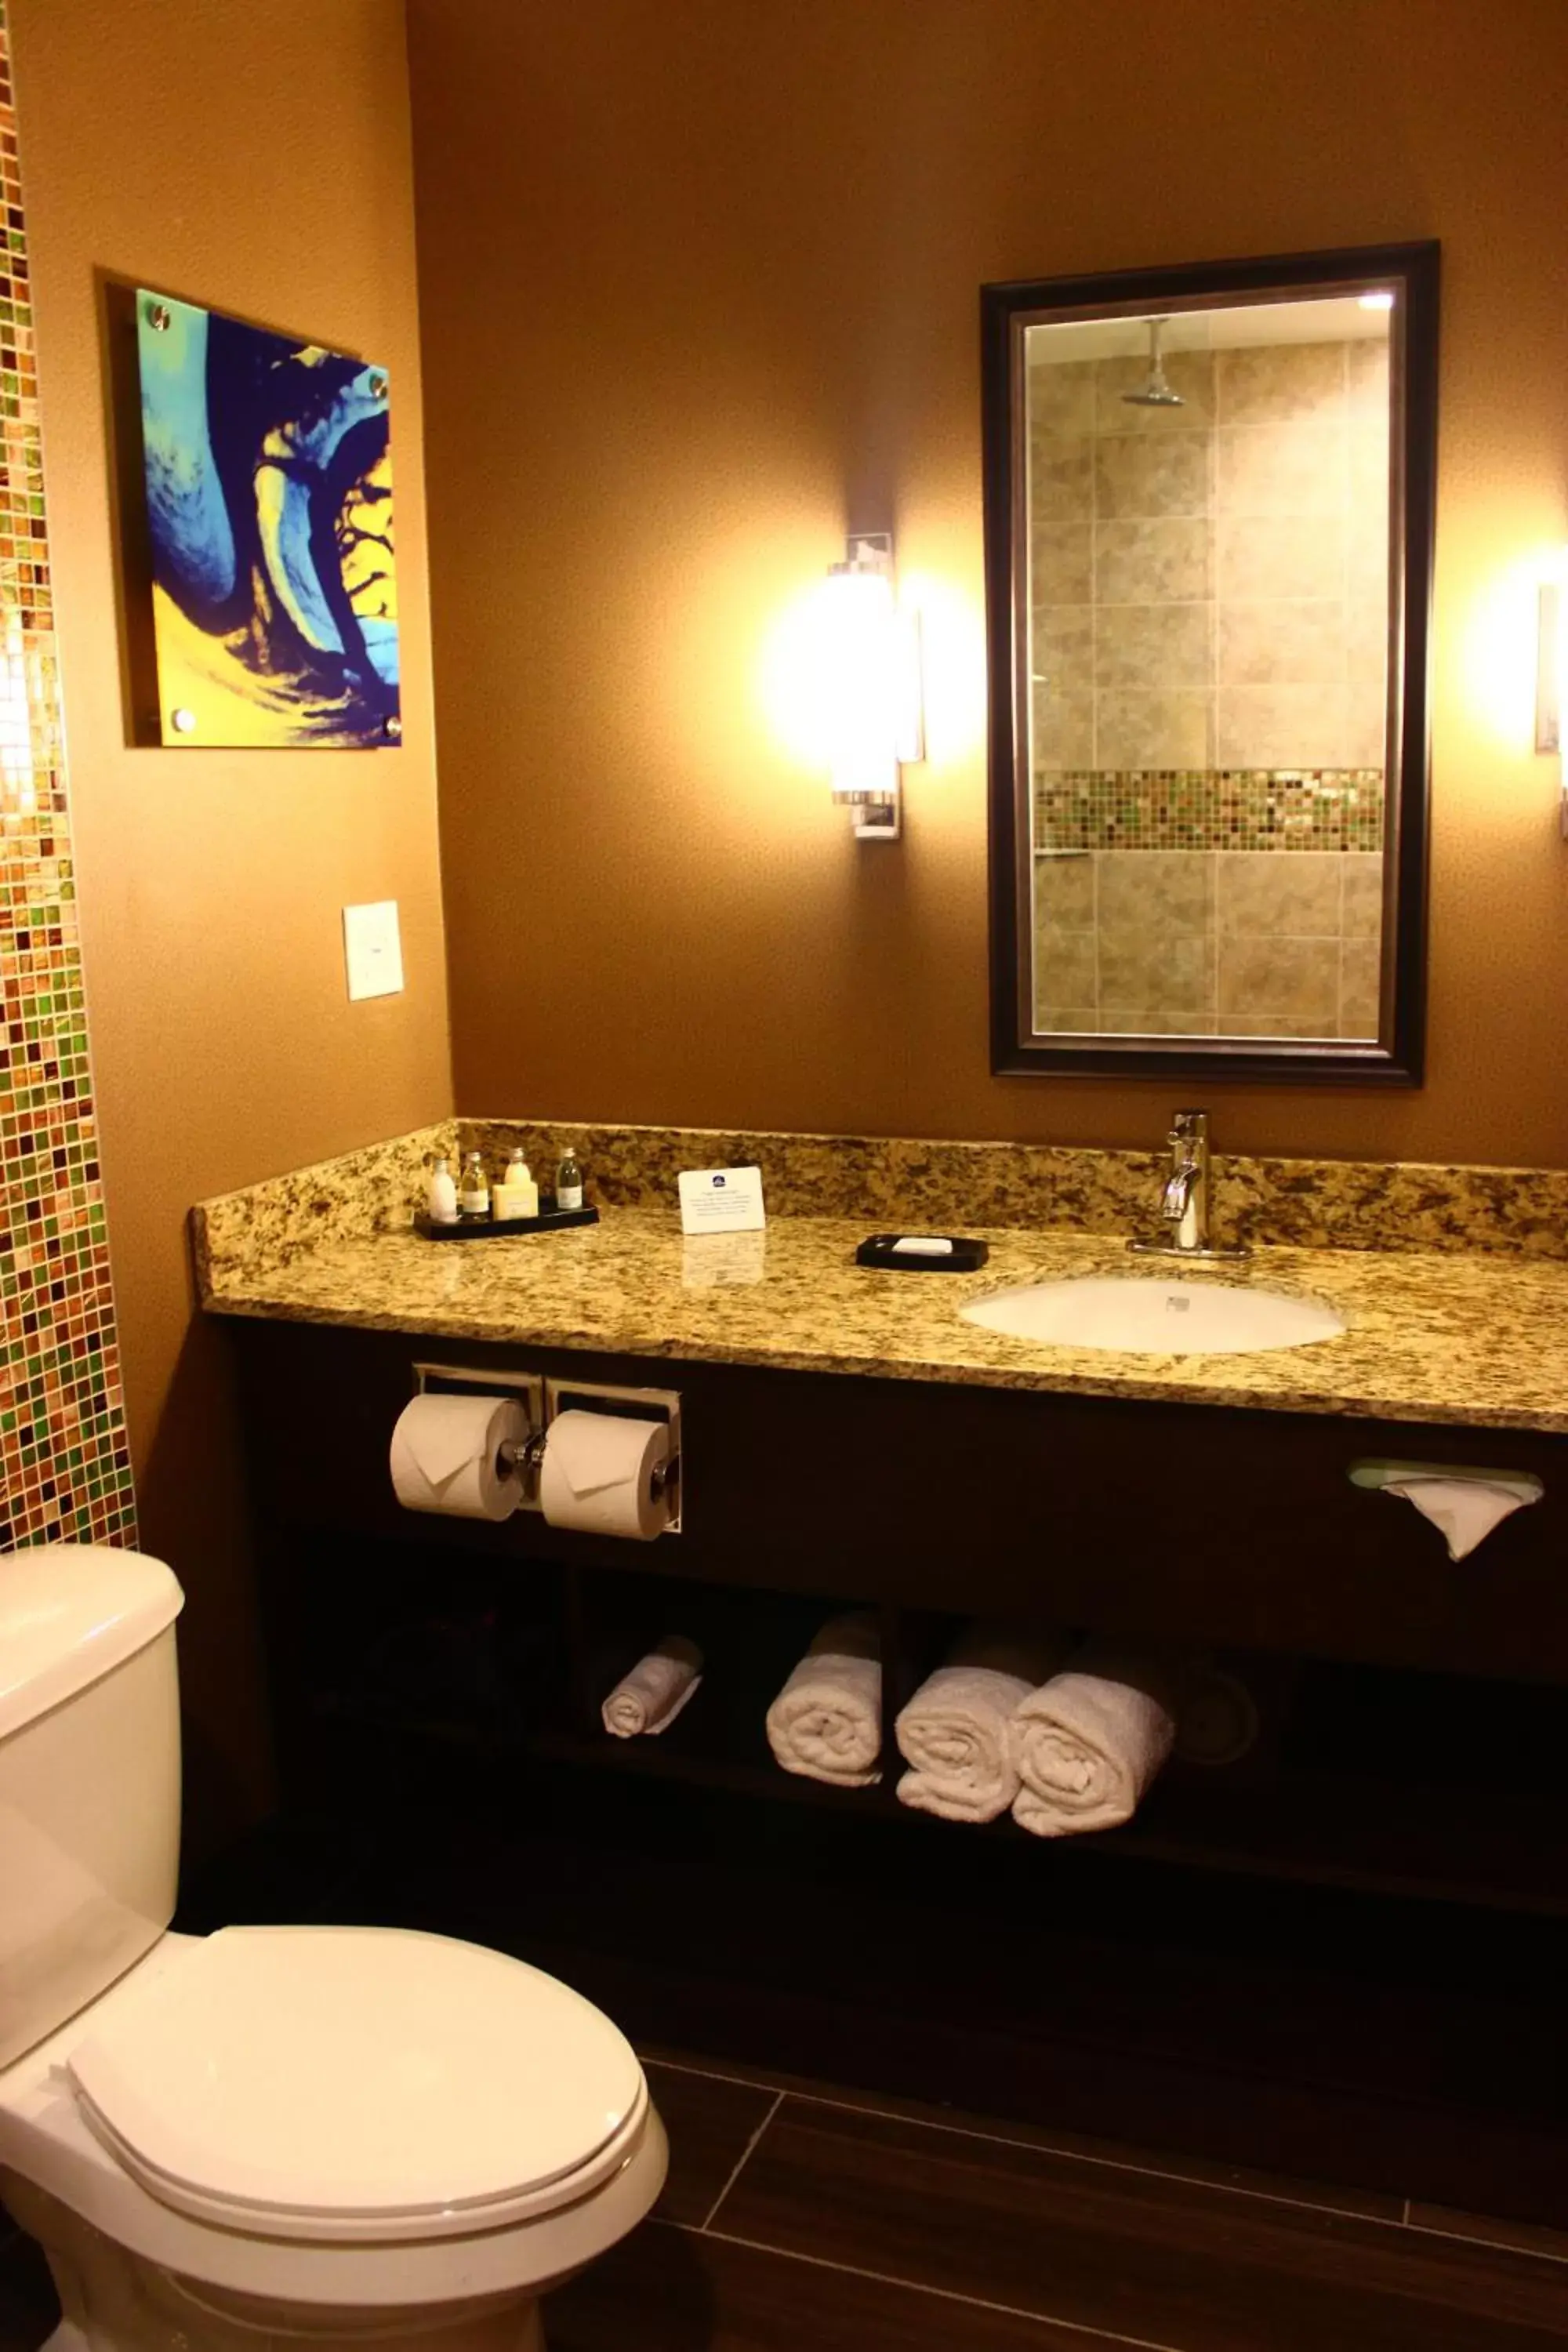 King Room - Non-Smoking in Best Western Plus Miami Executive Airport Hotel and Suites